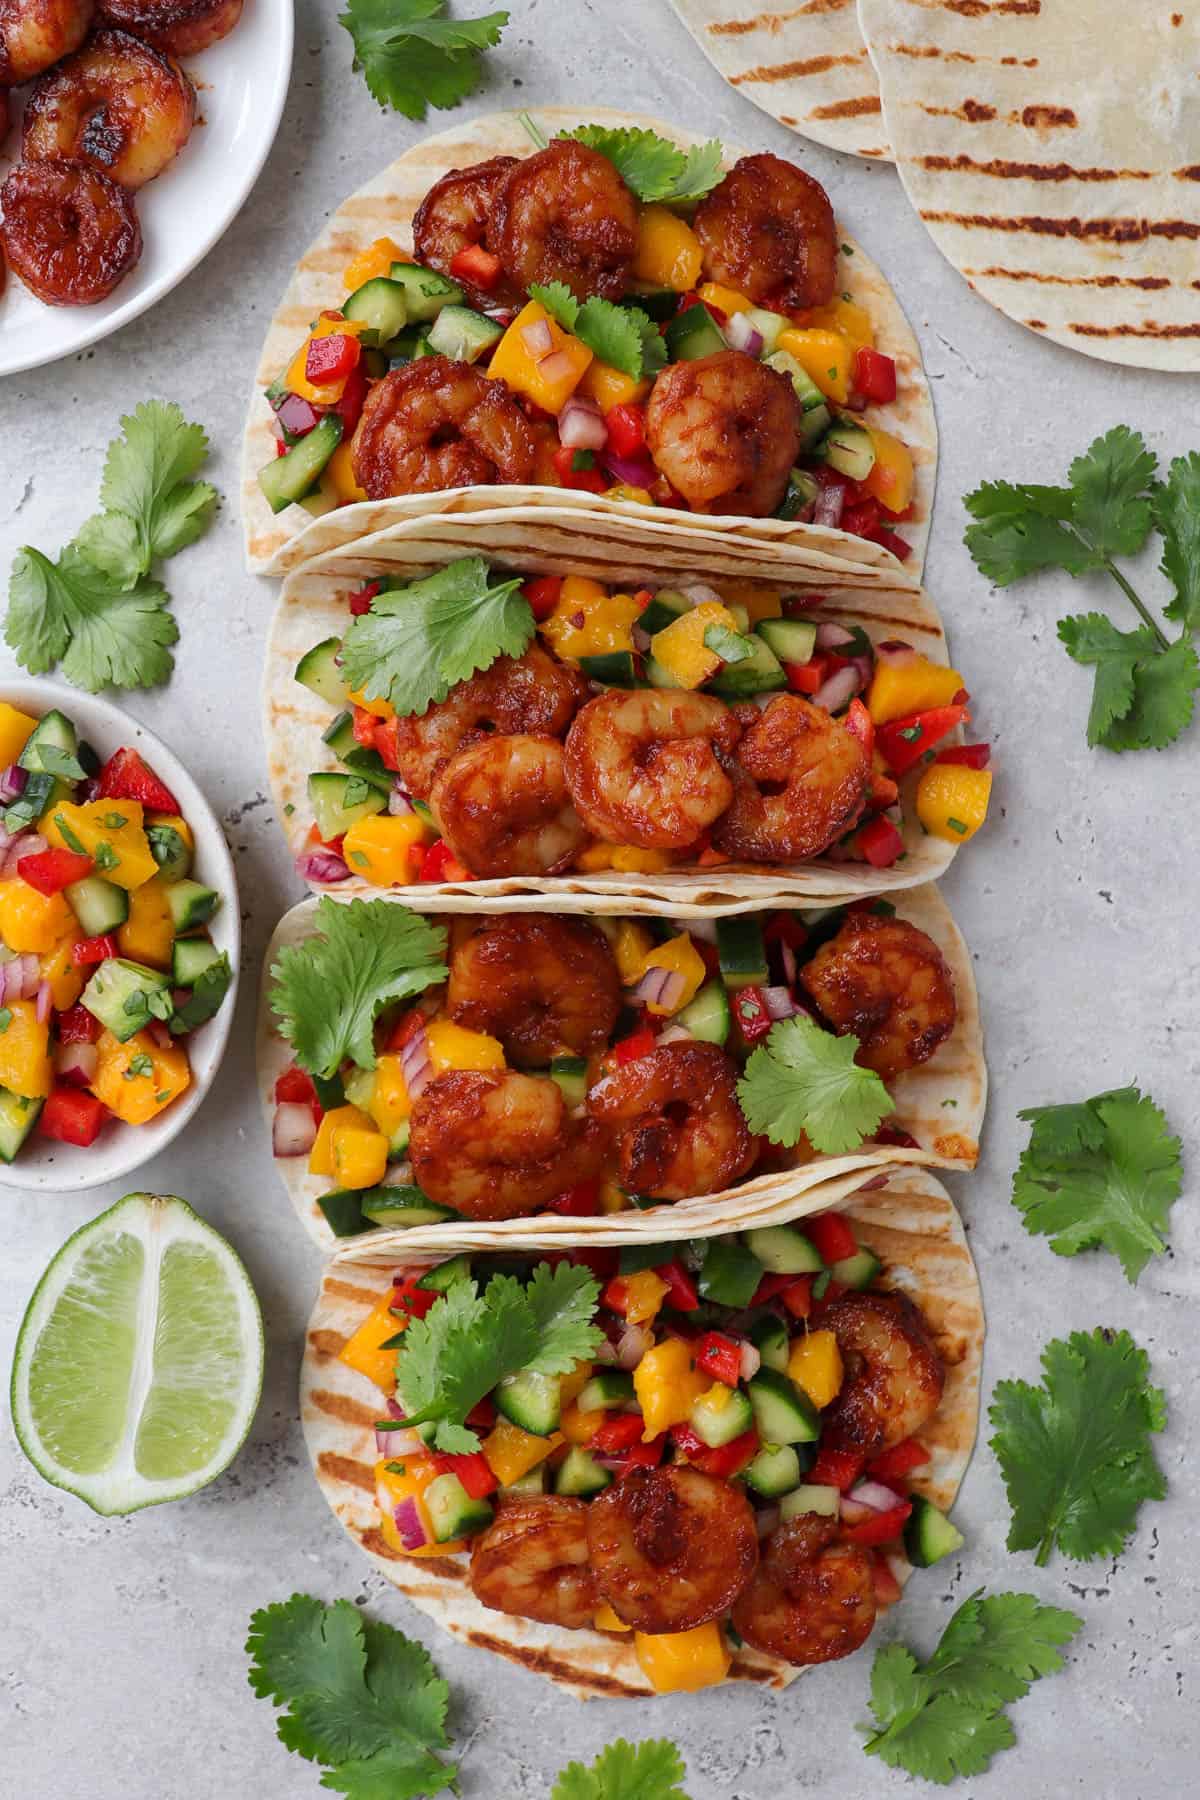 Tacos placed in a straight row.